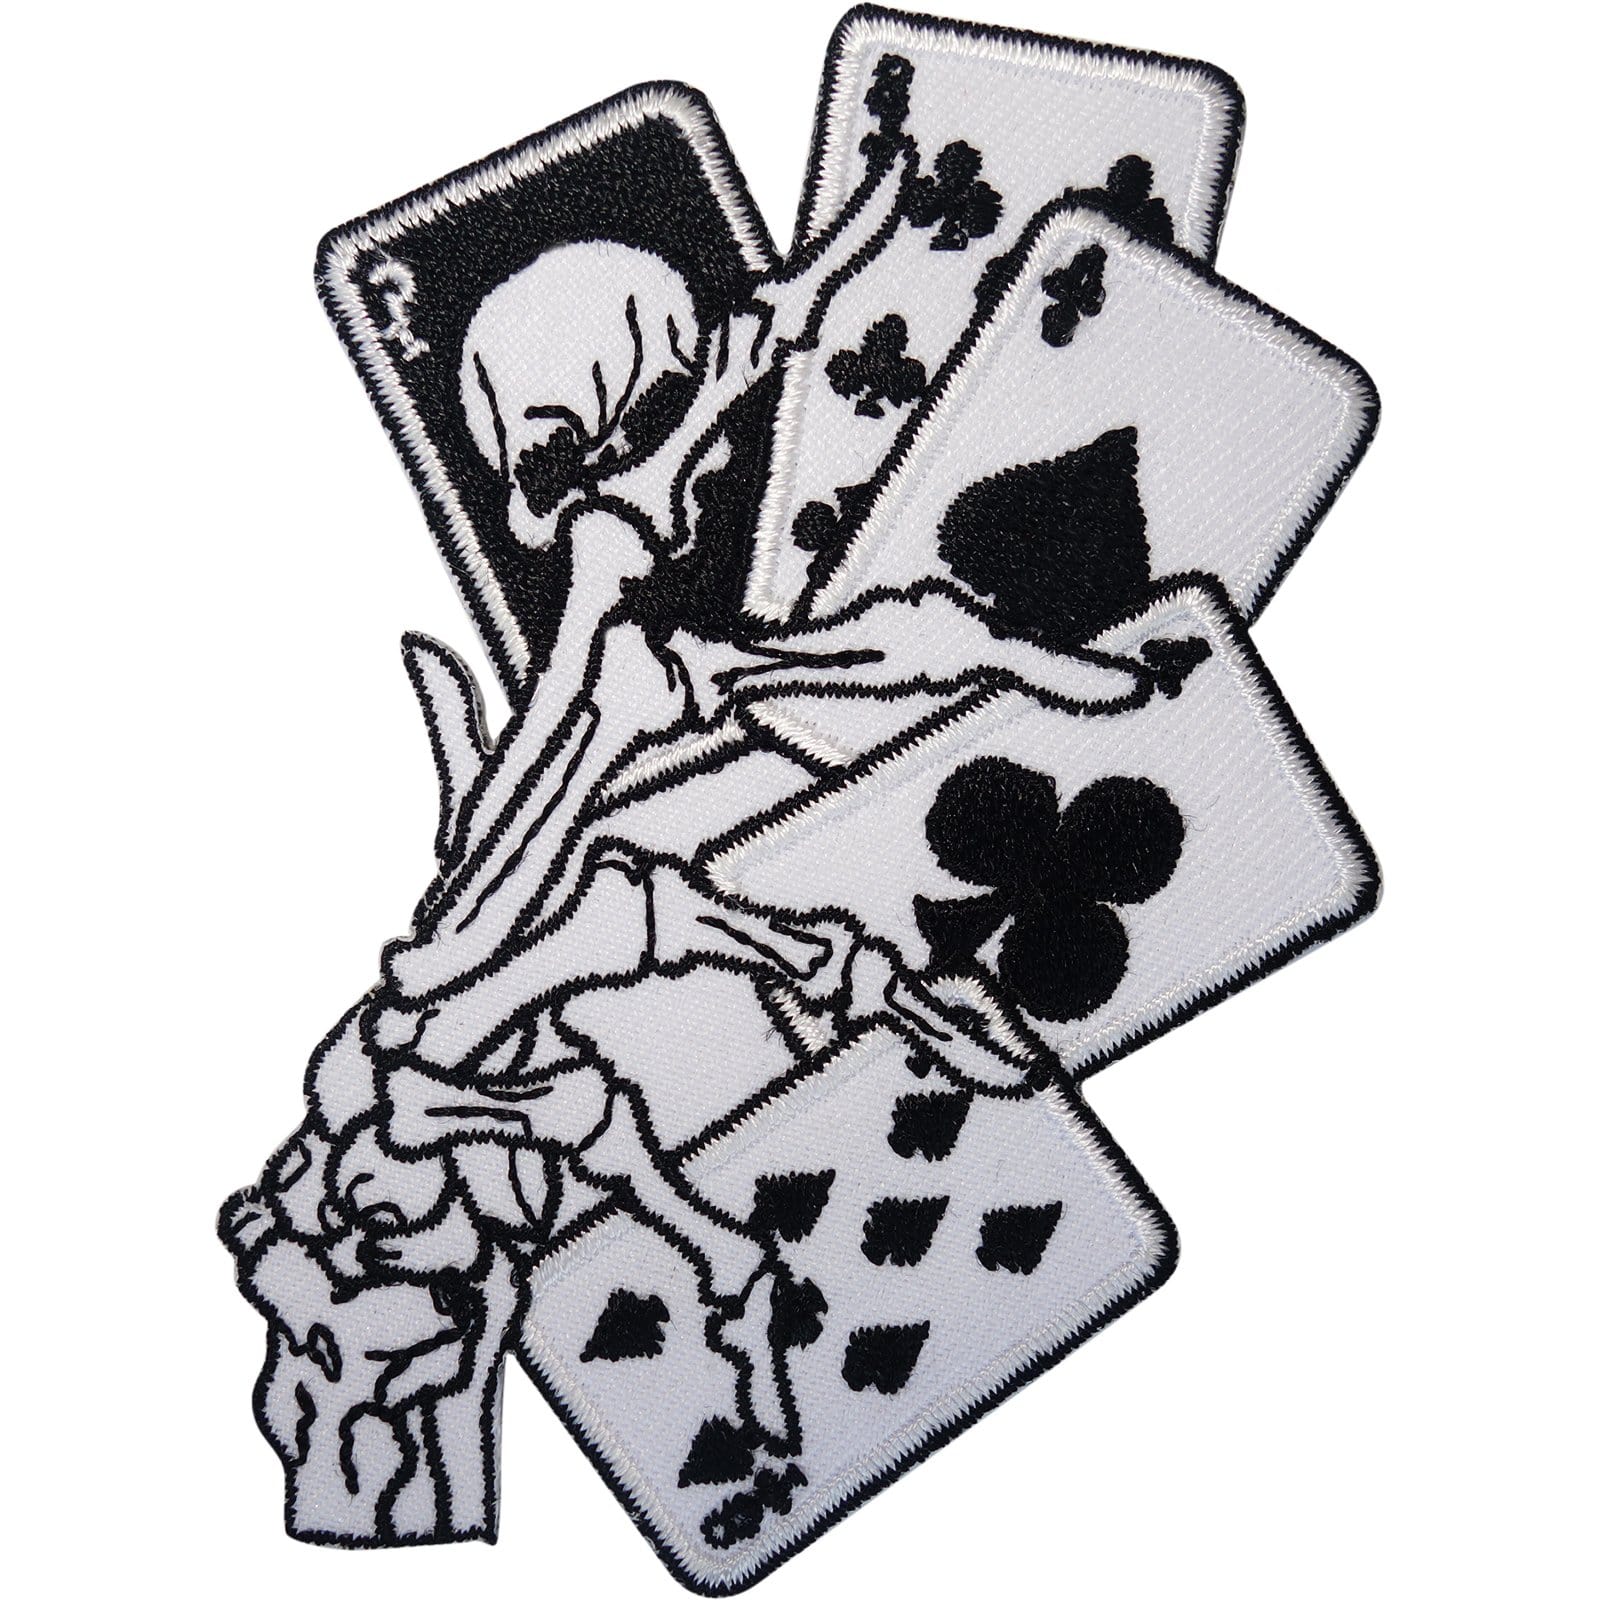 Skeleton Hand Playing Cards Patch Iron On Sew On Clothes Poker Embroidered Badge